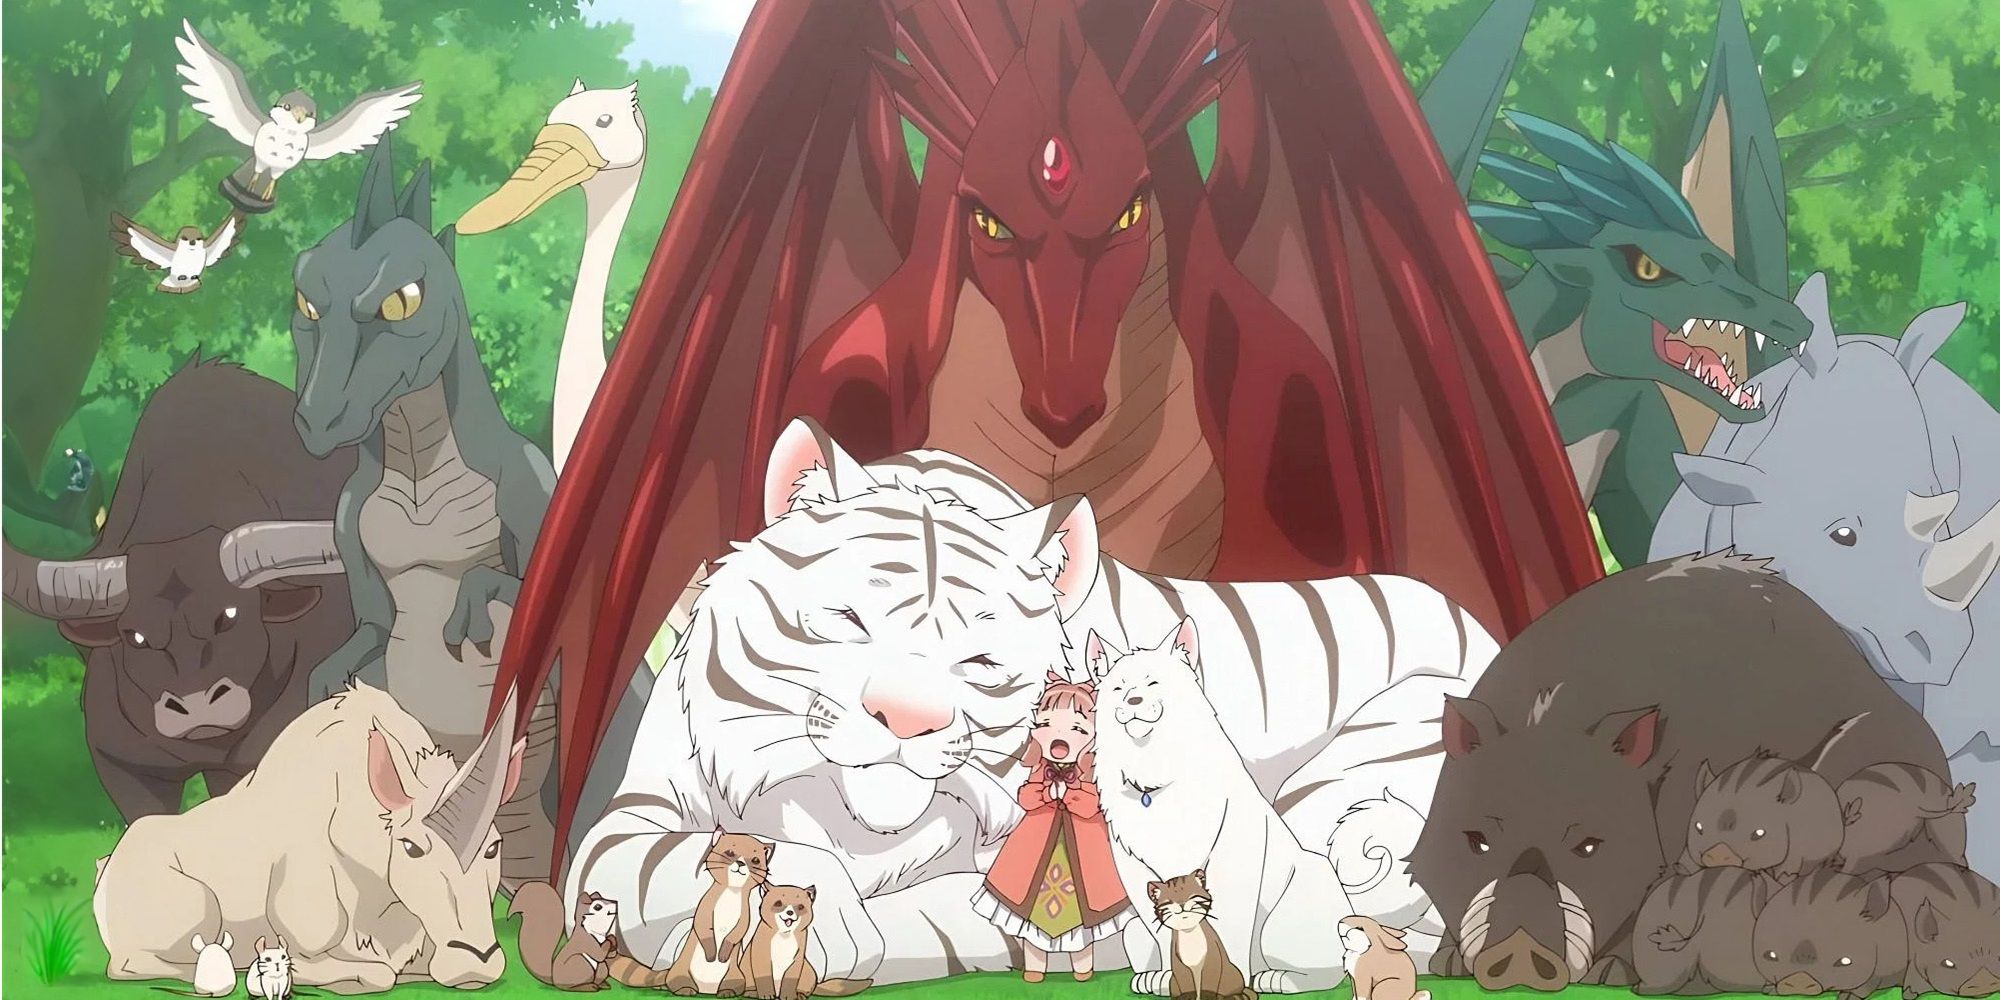 Fluffy Paradise, Nefertima Osphe is surrounded by animals, including the holy beast Lars and the red dragon.